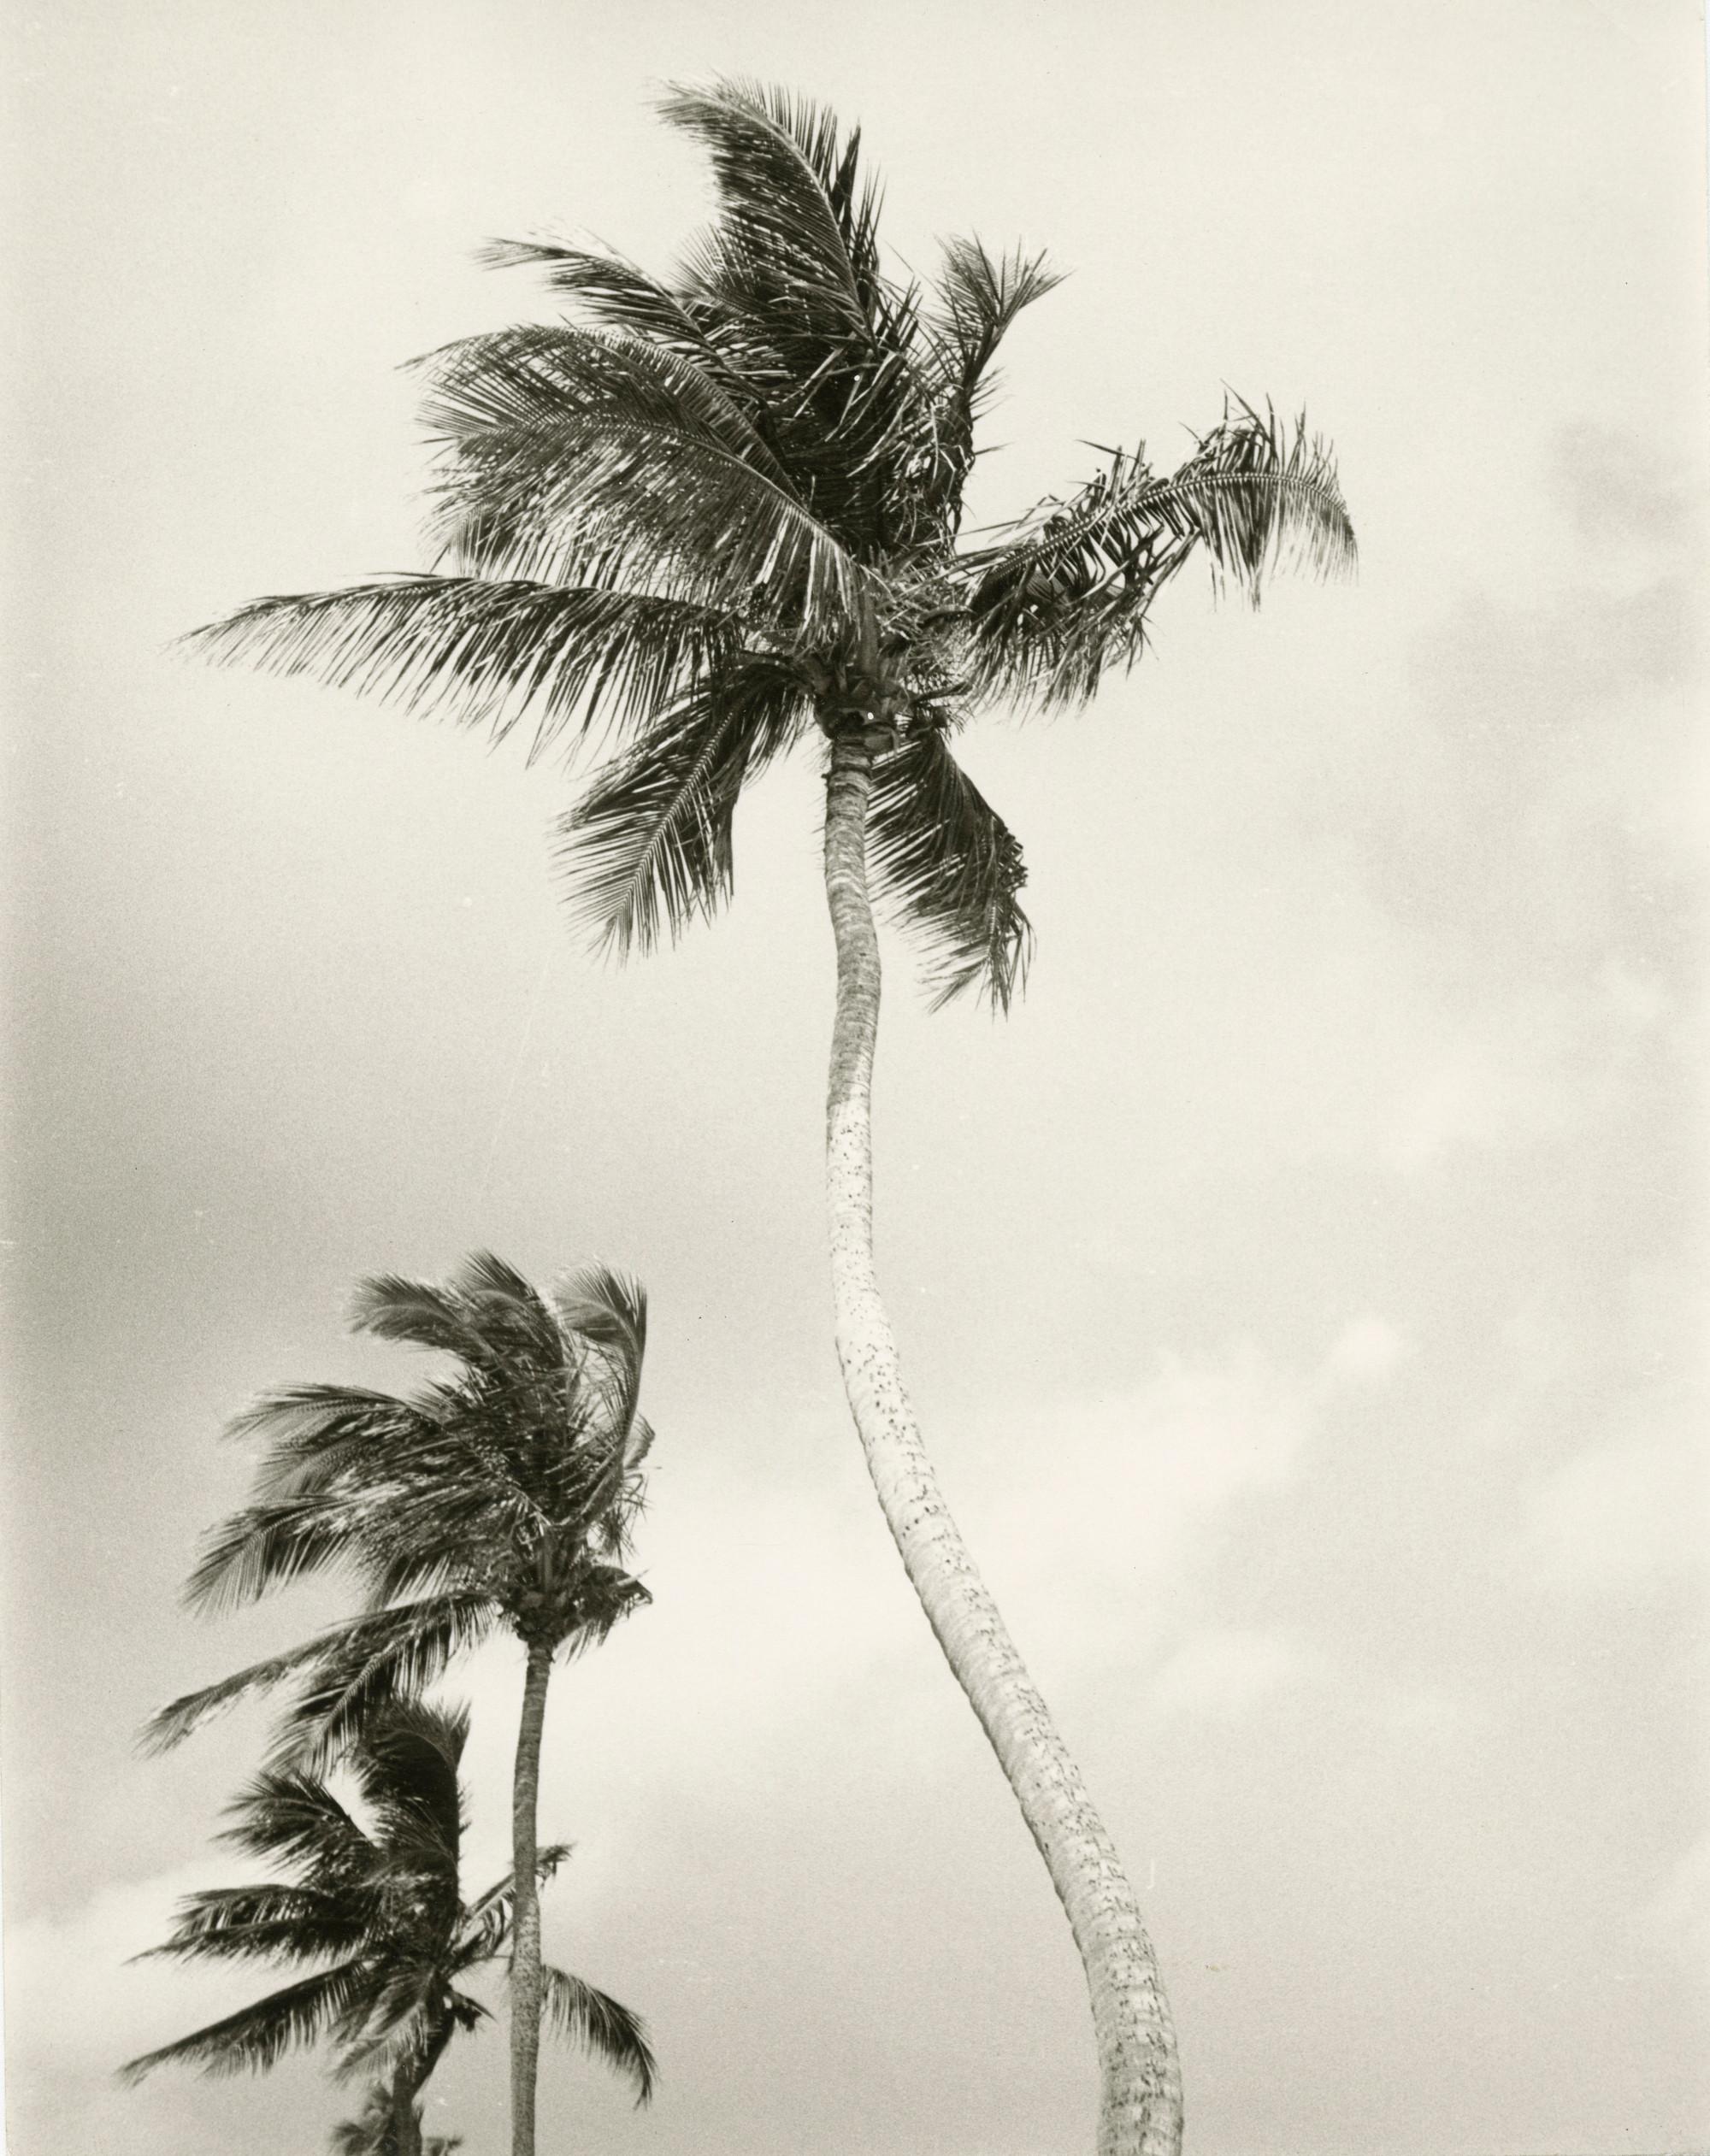 Andy Warhol Black and White Photograph - Palm Trees Against Sky